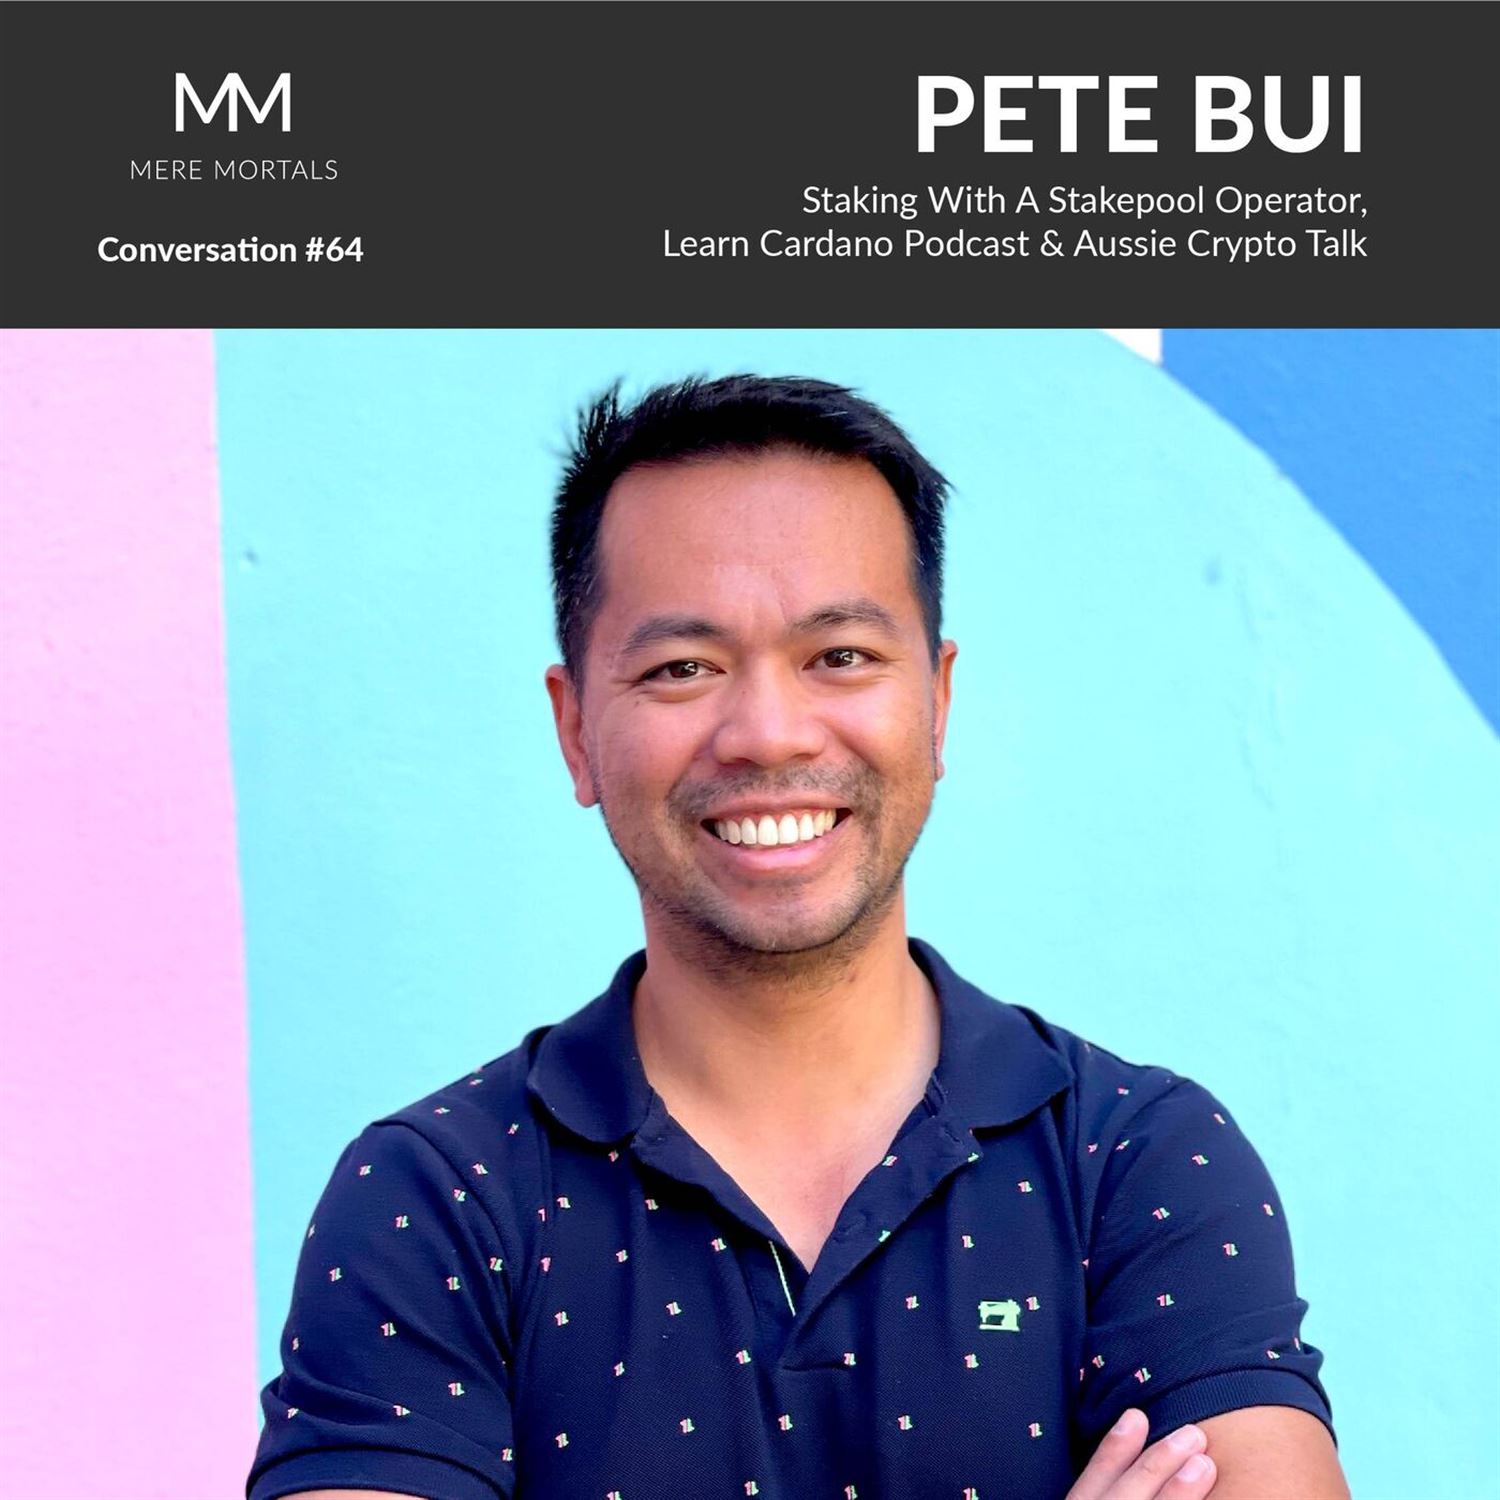 PETE BUI | Staking With A Stakepool Operator, Learn Cardano Podcast & Aussie Crypto Talk